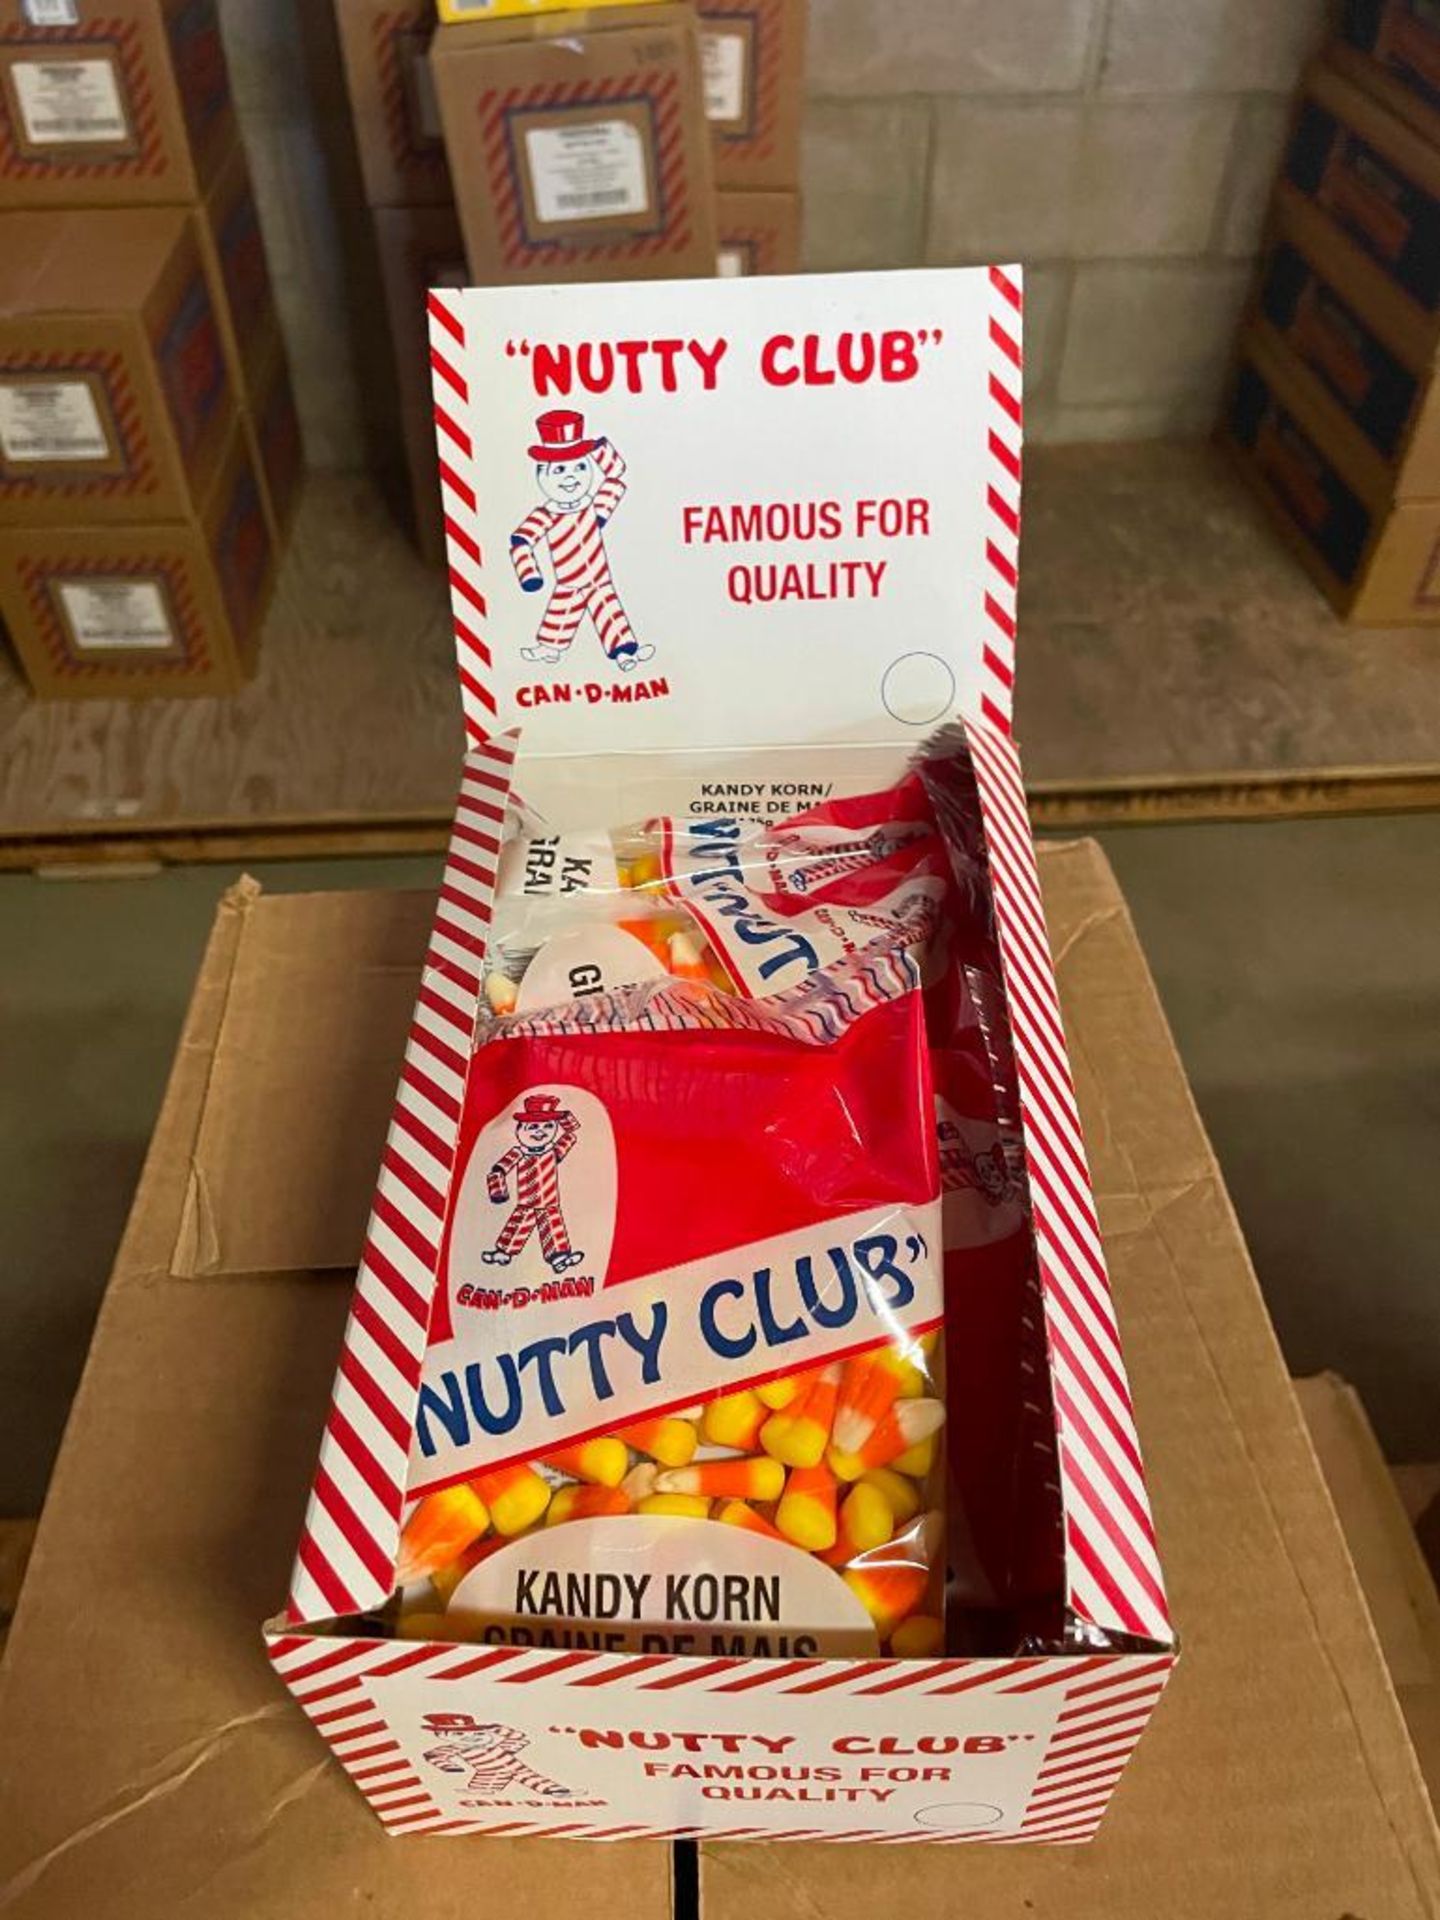 (3) CASES OF NUTTY CLUB KANDY KORN, 12/12/125G PER CASE - Image 2 of 3